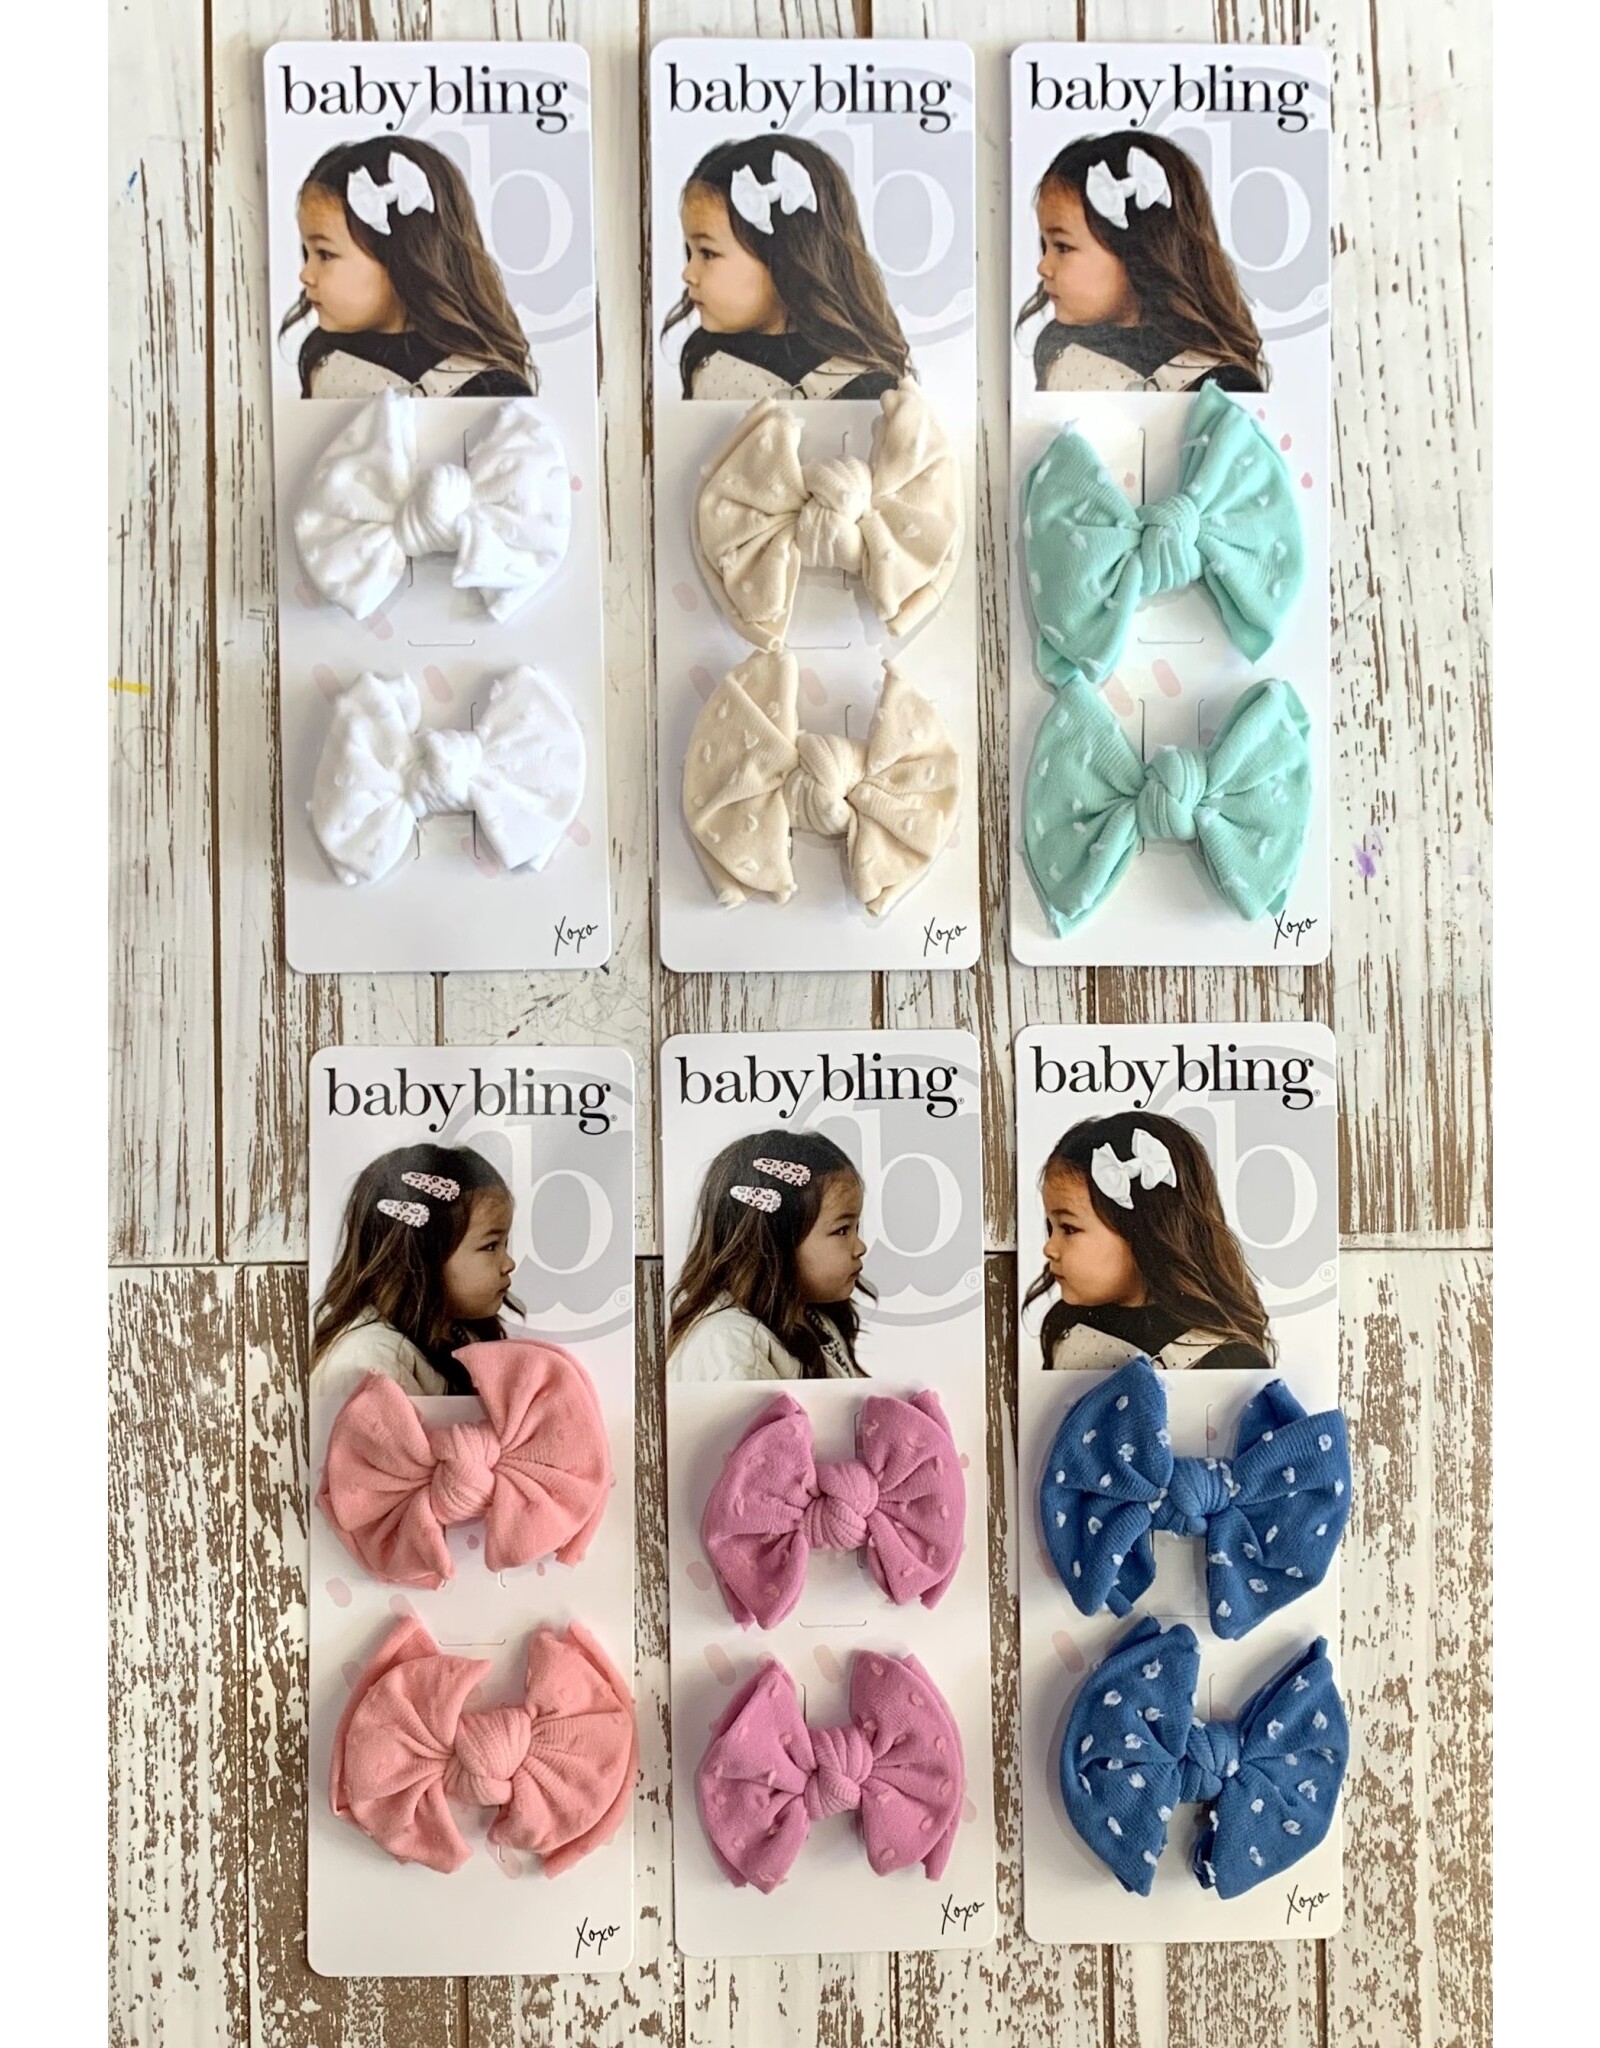 Baby Bling Baby Bling - 2PK Baby Shab Clips